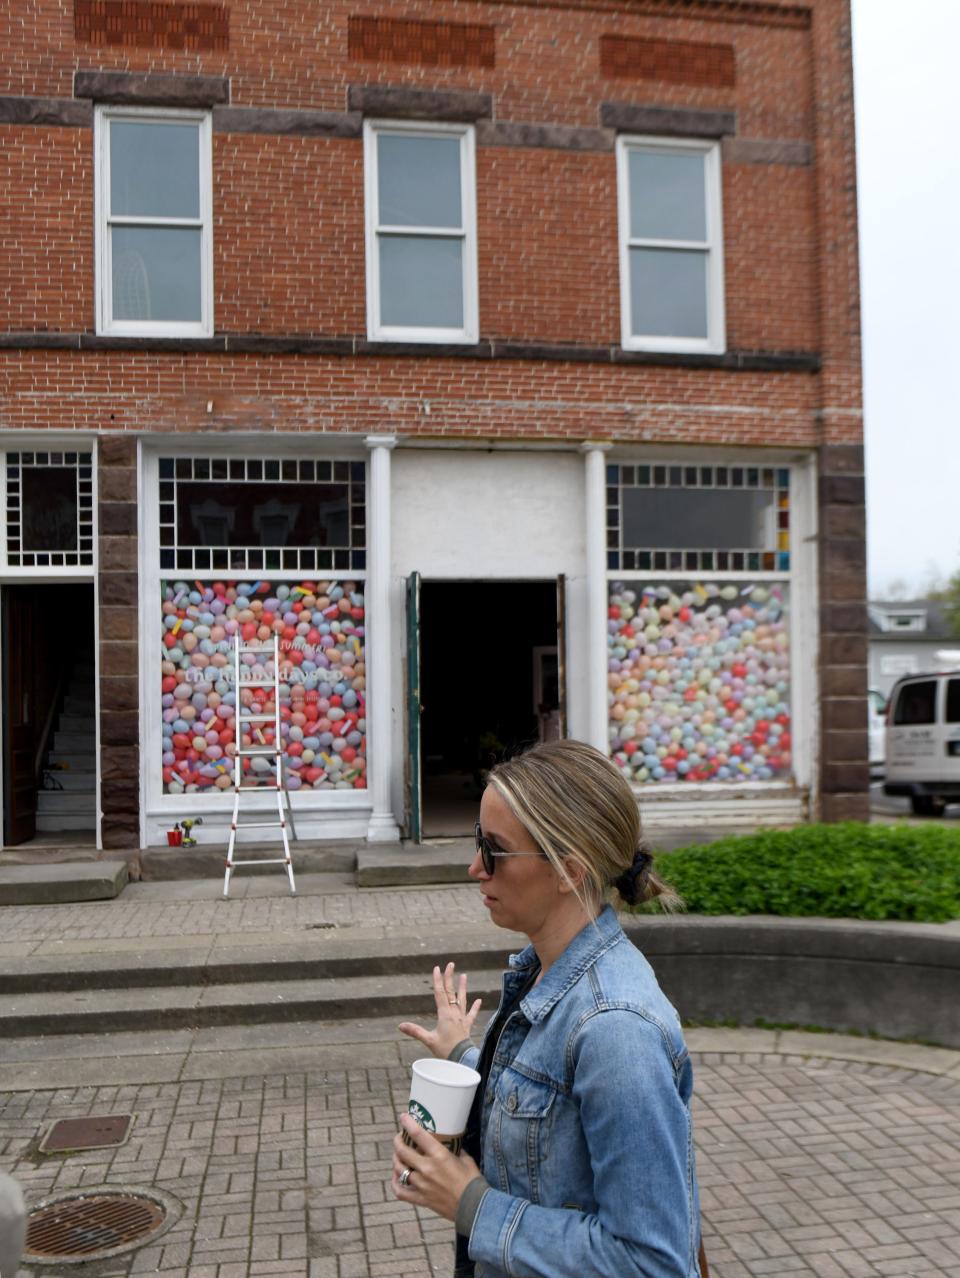 Krissy Widuck and her husband, Mike, purchased a 140-year-old building at 143 Canal St. N, Canal Fulton, in October and began renovations. The first floor will house a boutique business set to open in July. The couple is renovating the second floor into a bed and breakfast. The Cornerstone on the Canal is set to begin welcoming guests this summer.